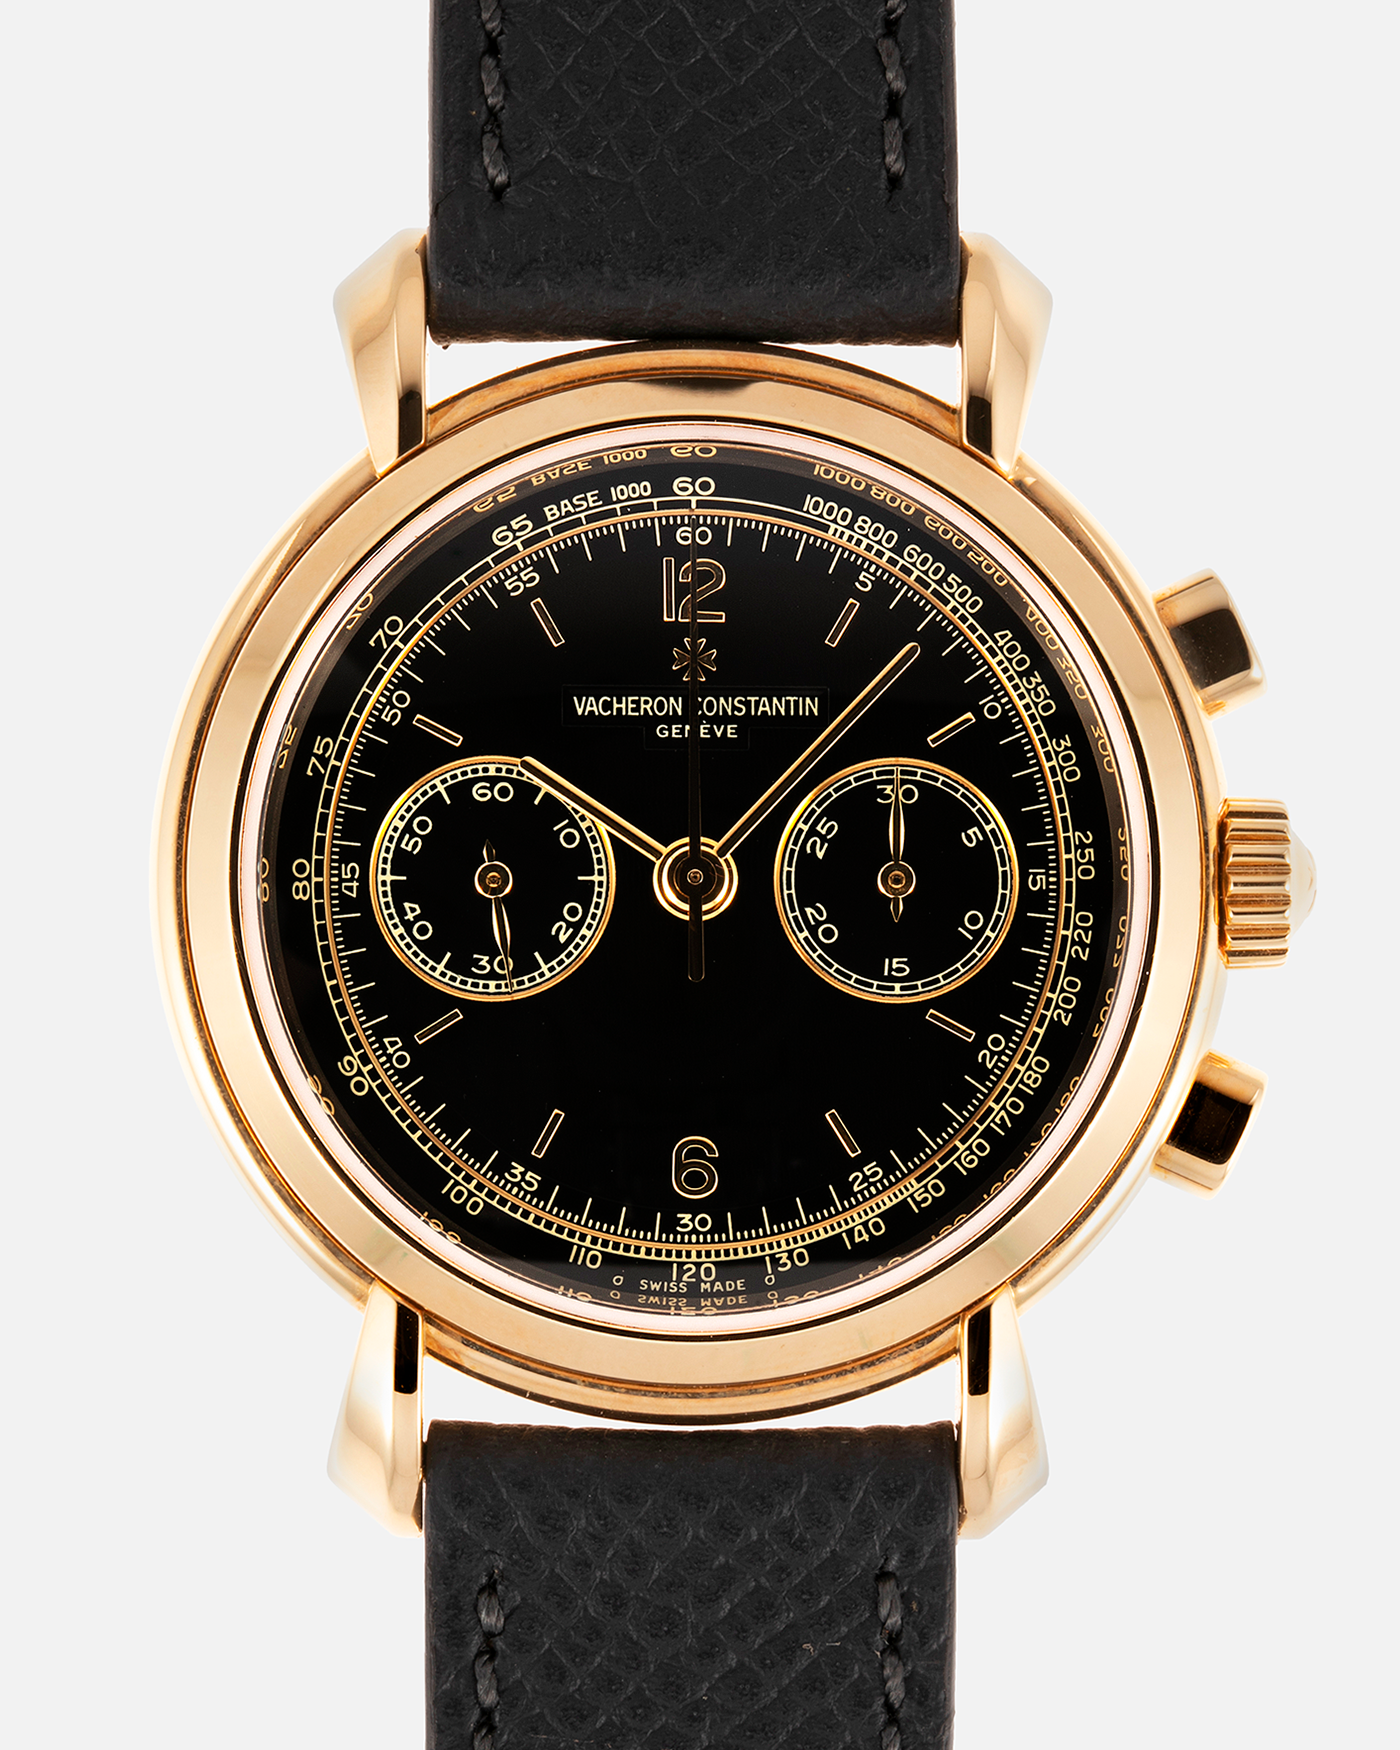 Brand: Vacheron Constantin Year: 1990’s Model: Les Historiques Chronograph  Reference Number: 47101 Material: 18k Yellow Gold Movement: Lemania 2320 Based Cal. 1141 Case Diameter: 37mm Bracelet: Molequin Anthracite Grey Textured Calf with 18k Yellow Gold Tang Buckle